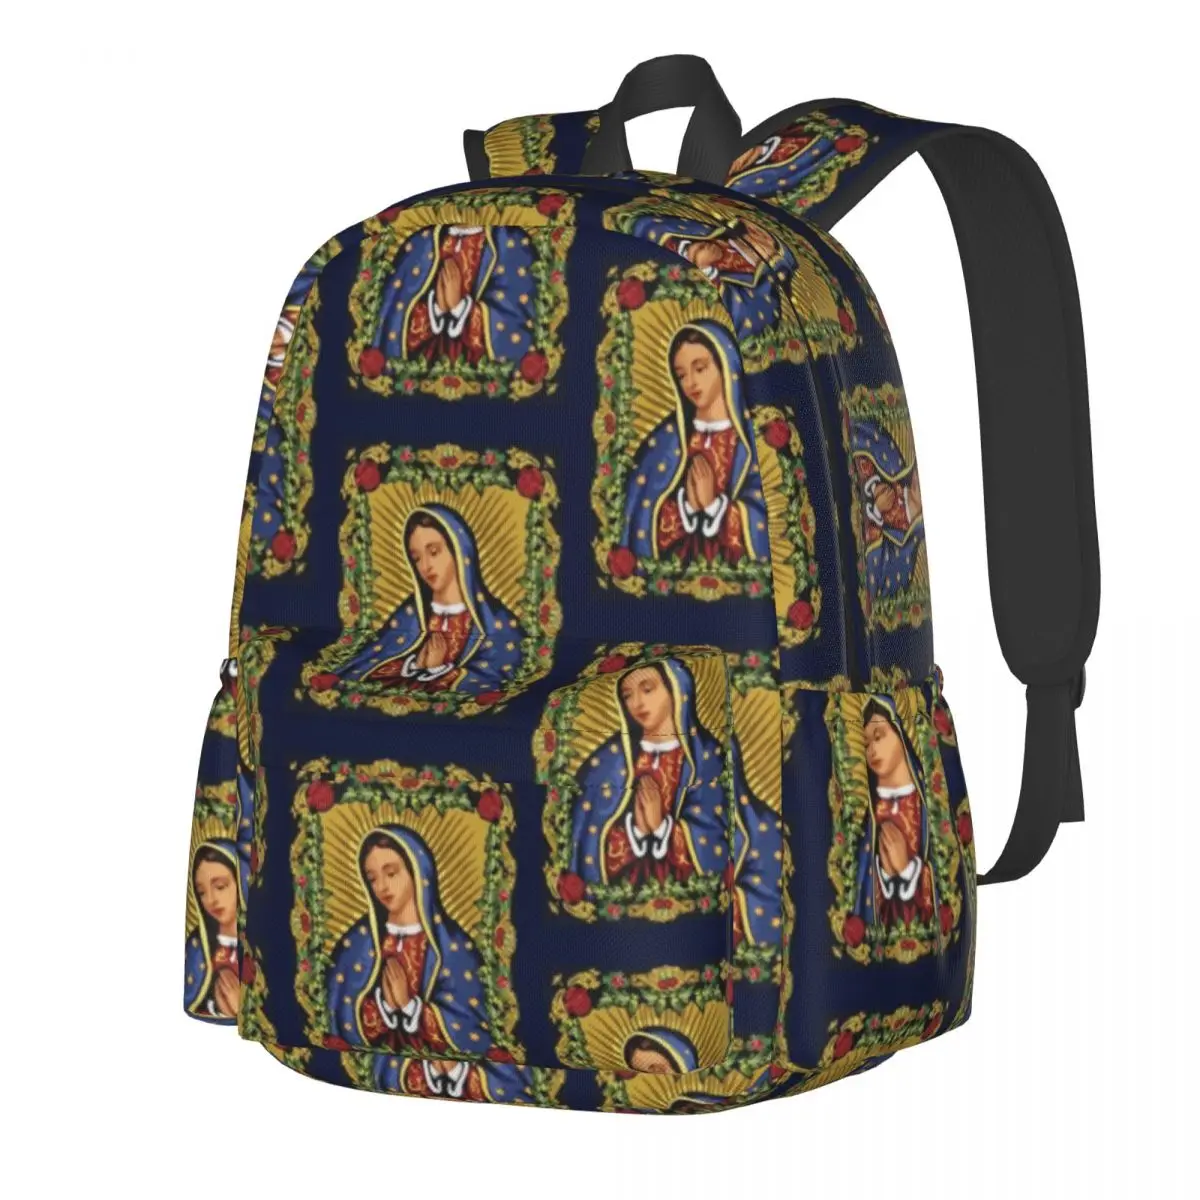 

Our Lady Of Guadalupe Backpack Women Men Virgin Mary Pattern Backpacks Polyester Funny School Bags Camping High Quality Rucksack